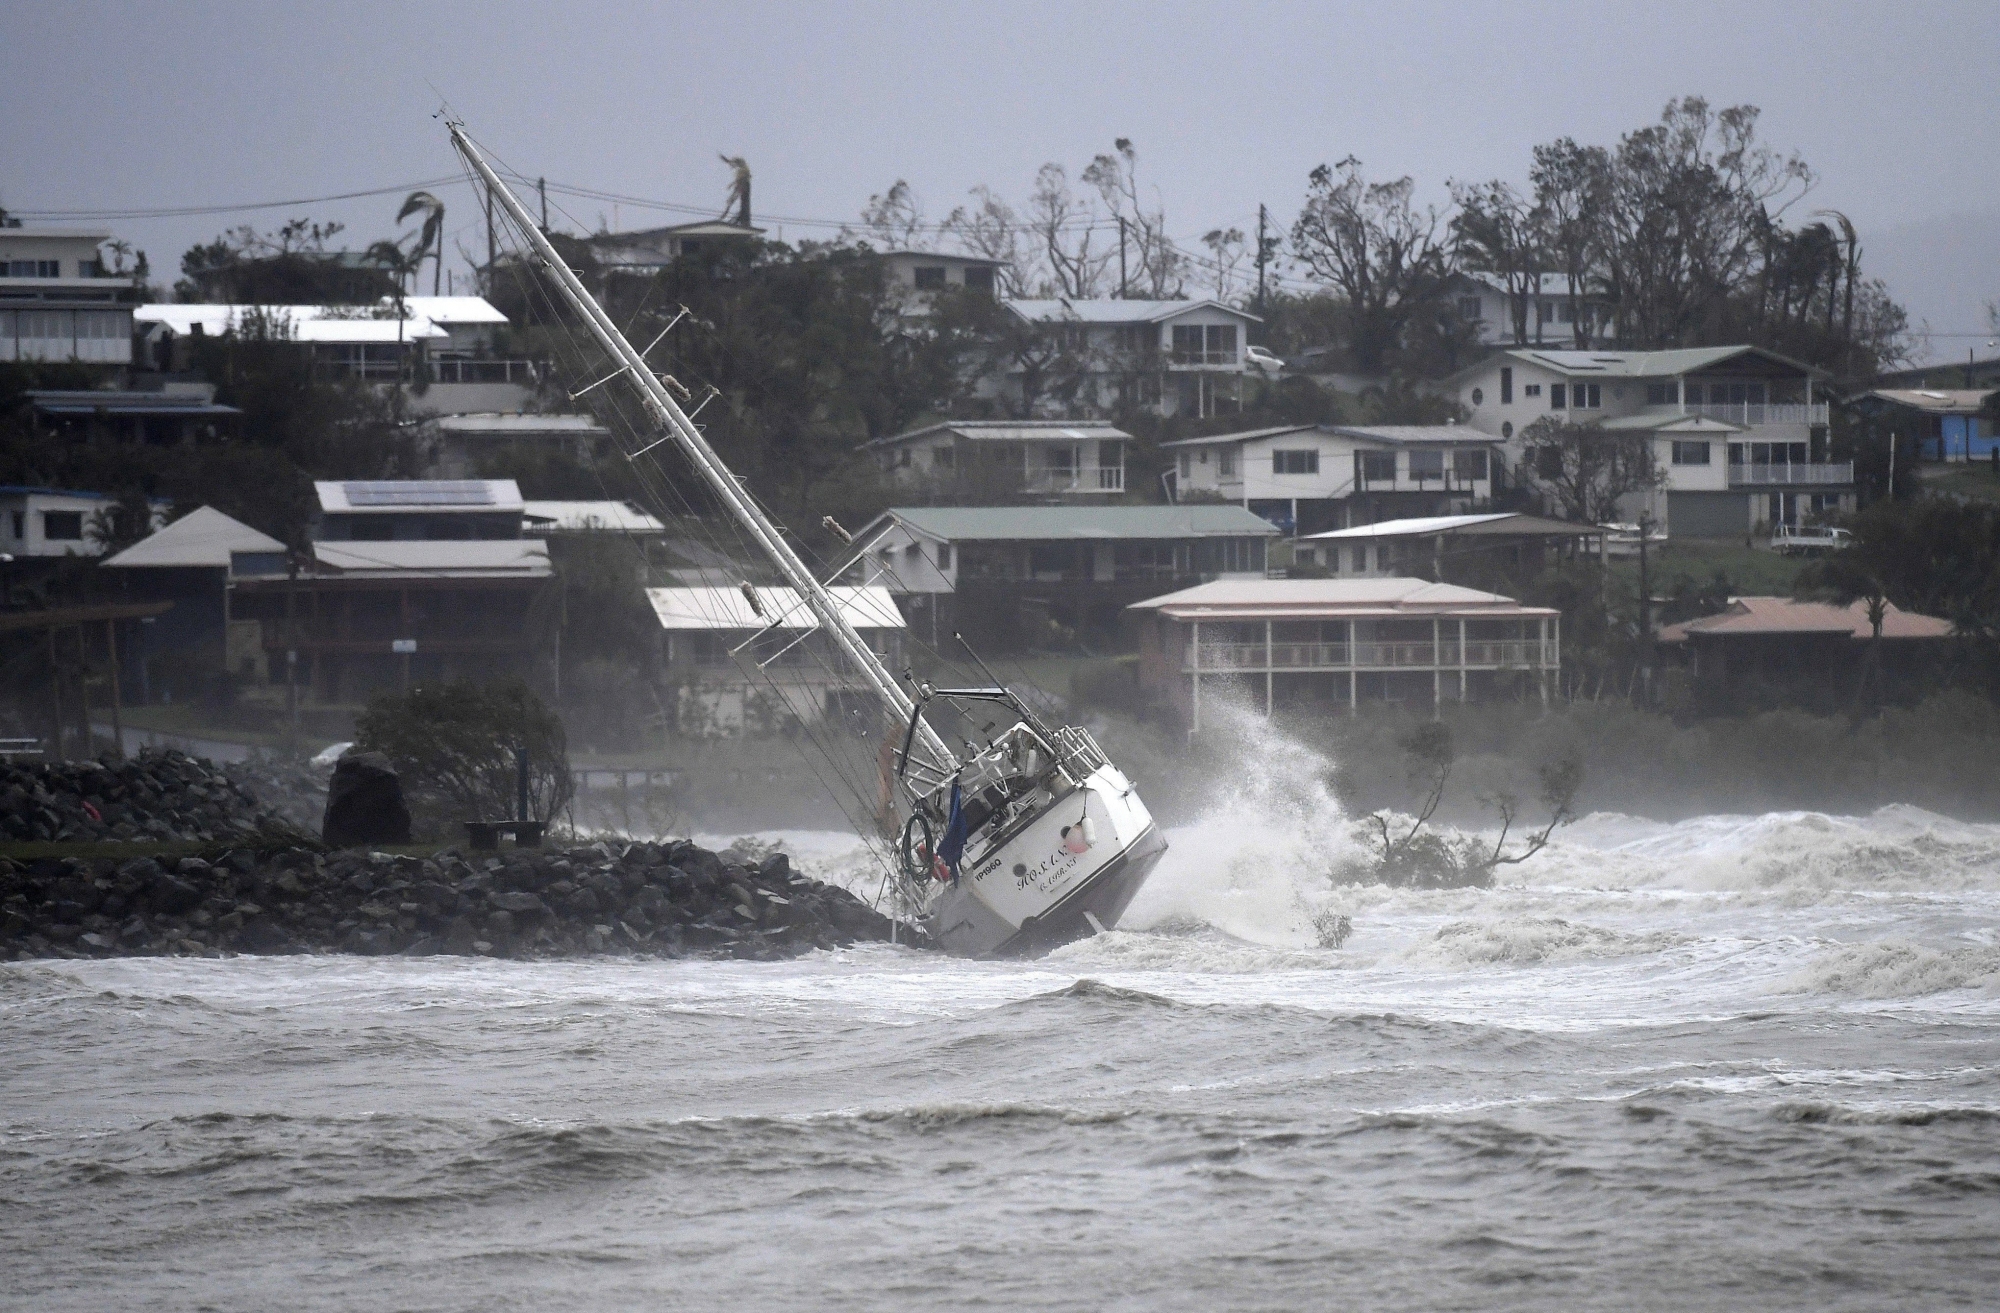 epa05876196 A boat is smashed against the rocks at Airlie Beach, Queensland, Australia, 29 March 2017. Cyclone Debbie hit Queensland's far north coast yesterday as a category 4 cyclone, causing widespread damage.  EPA/DAN PELED  AUSTRALIA AND NEW ZEALAND OUT AUSTRALIA CYCLONE DEBBIE